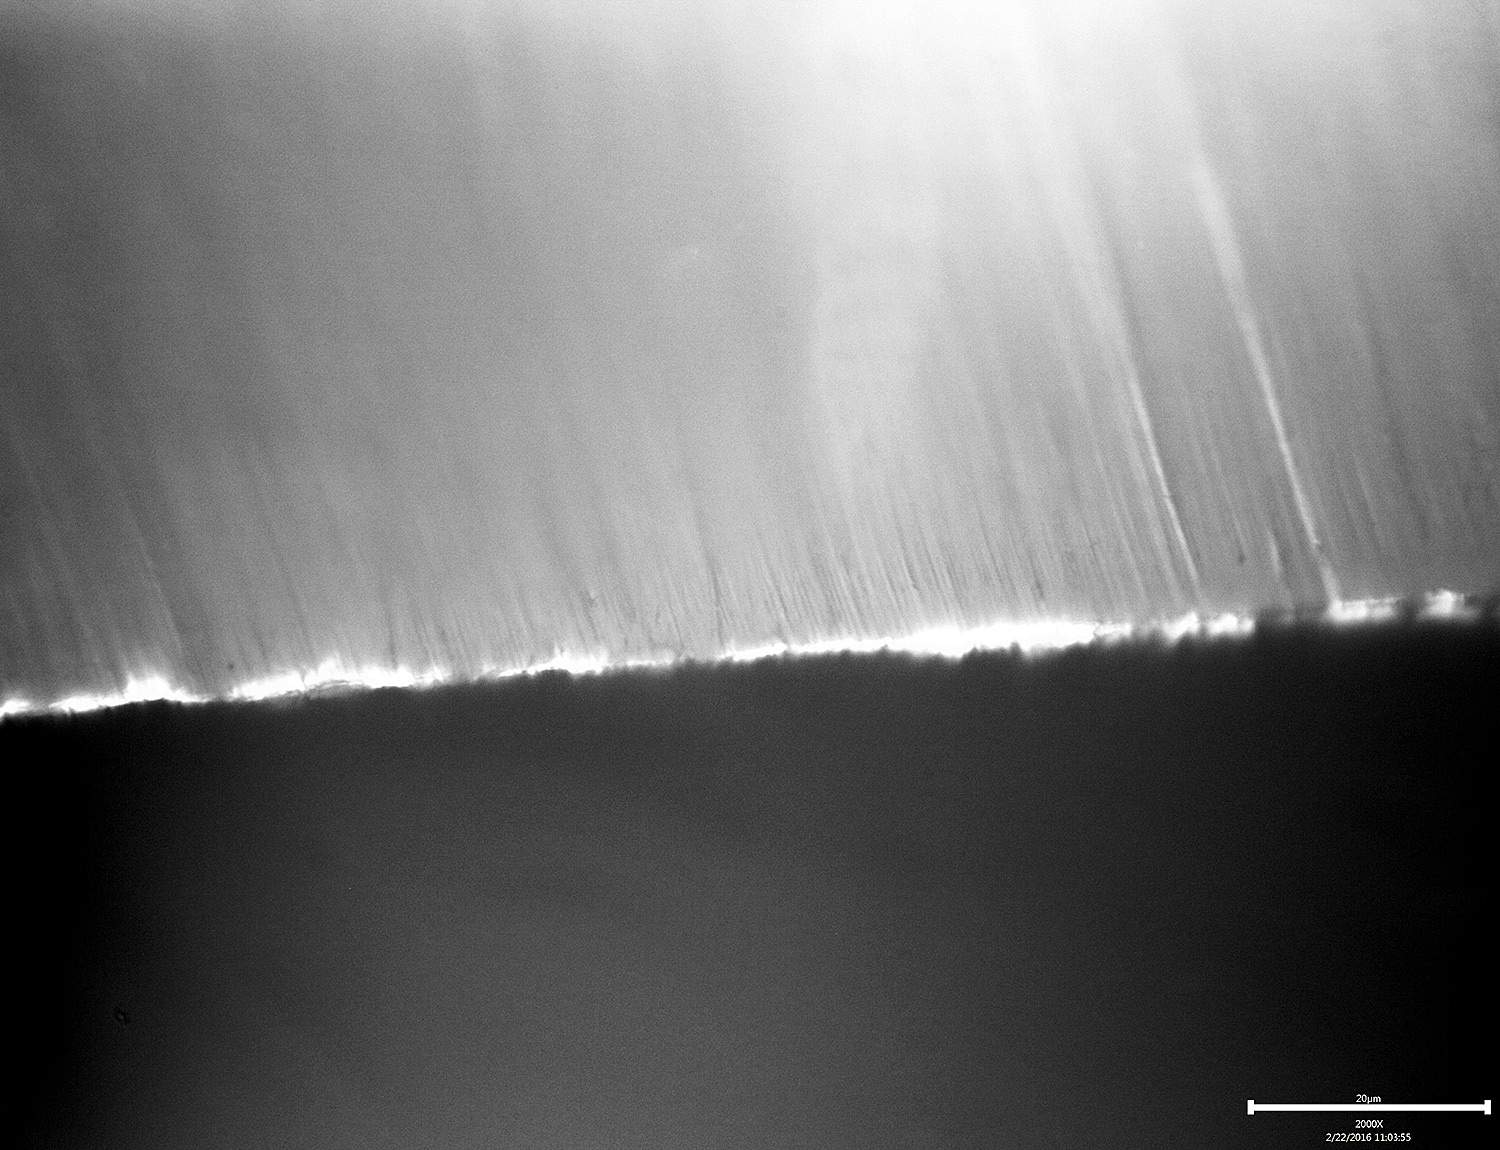 2000x-Vertical-.5-microns